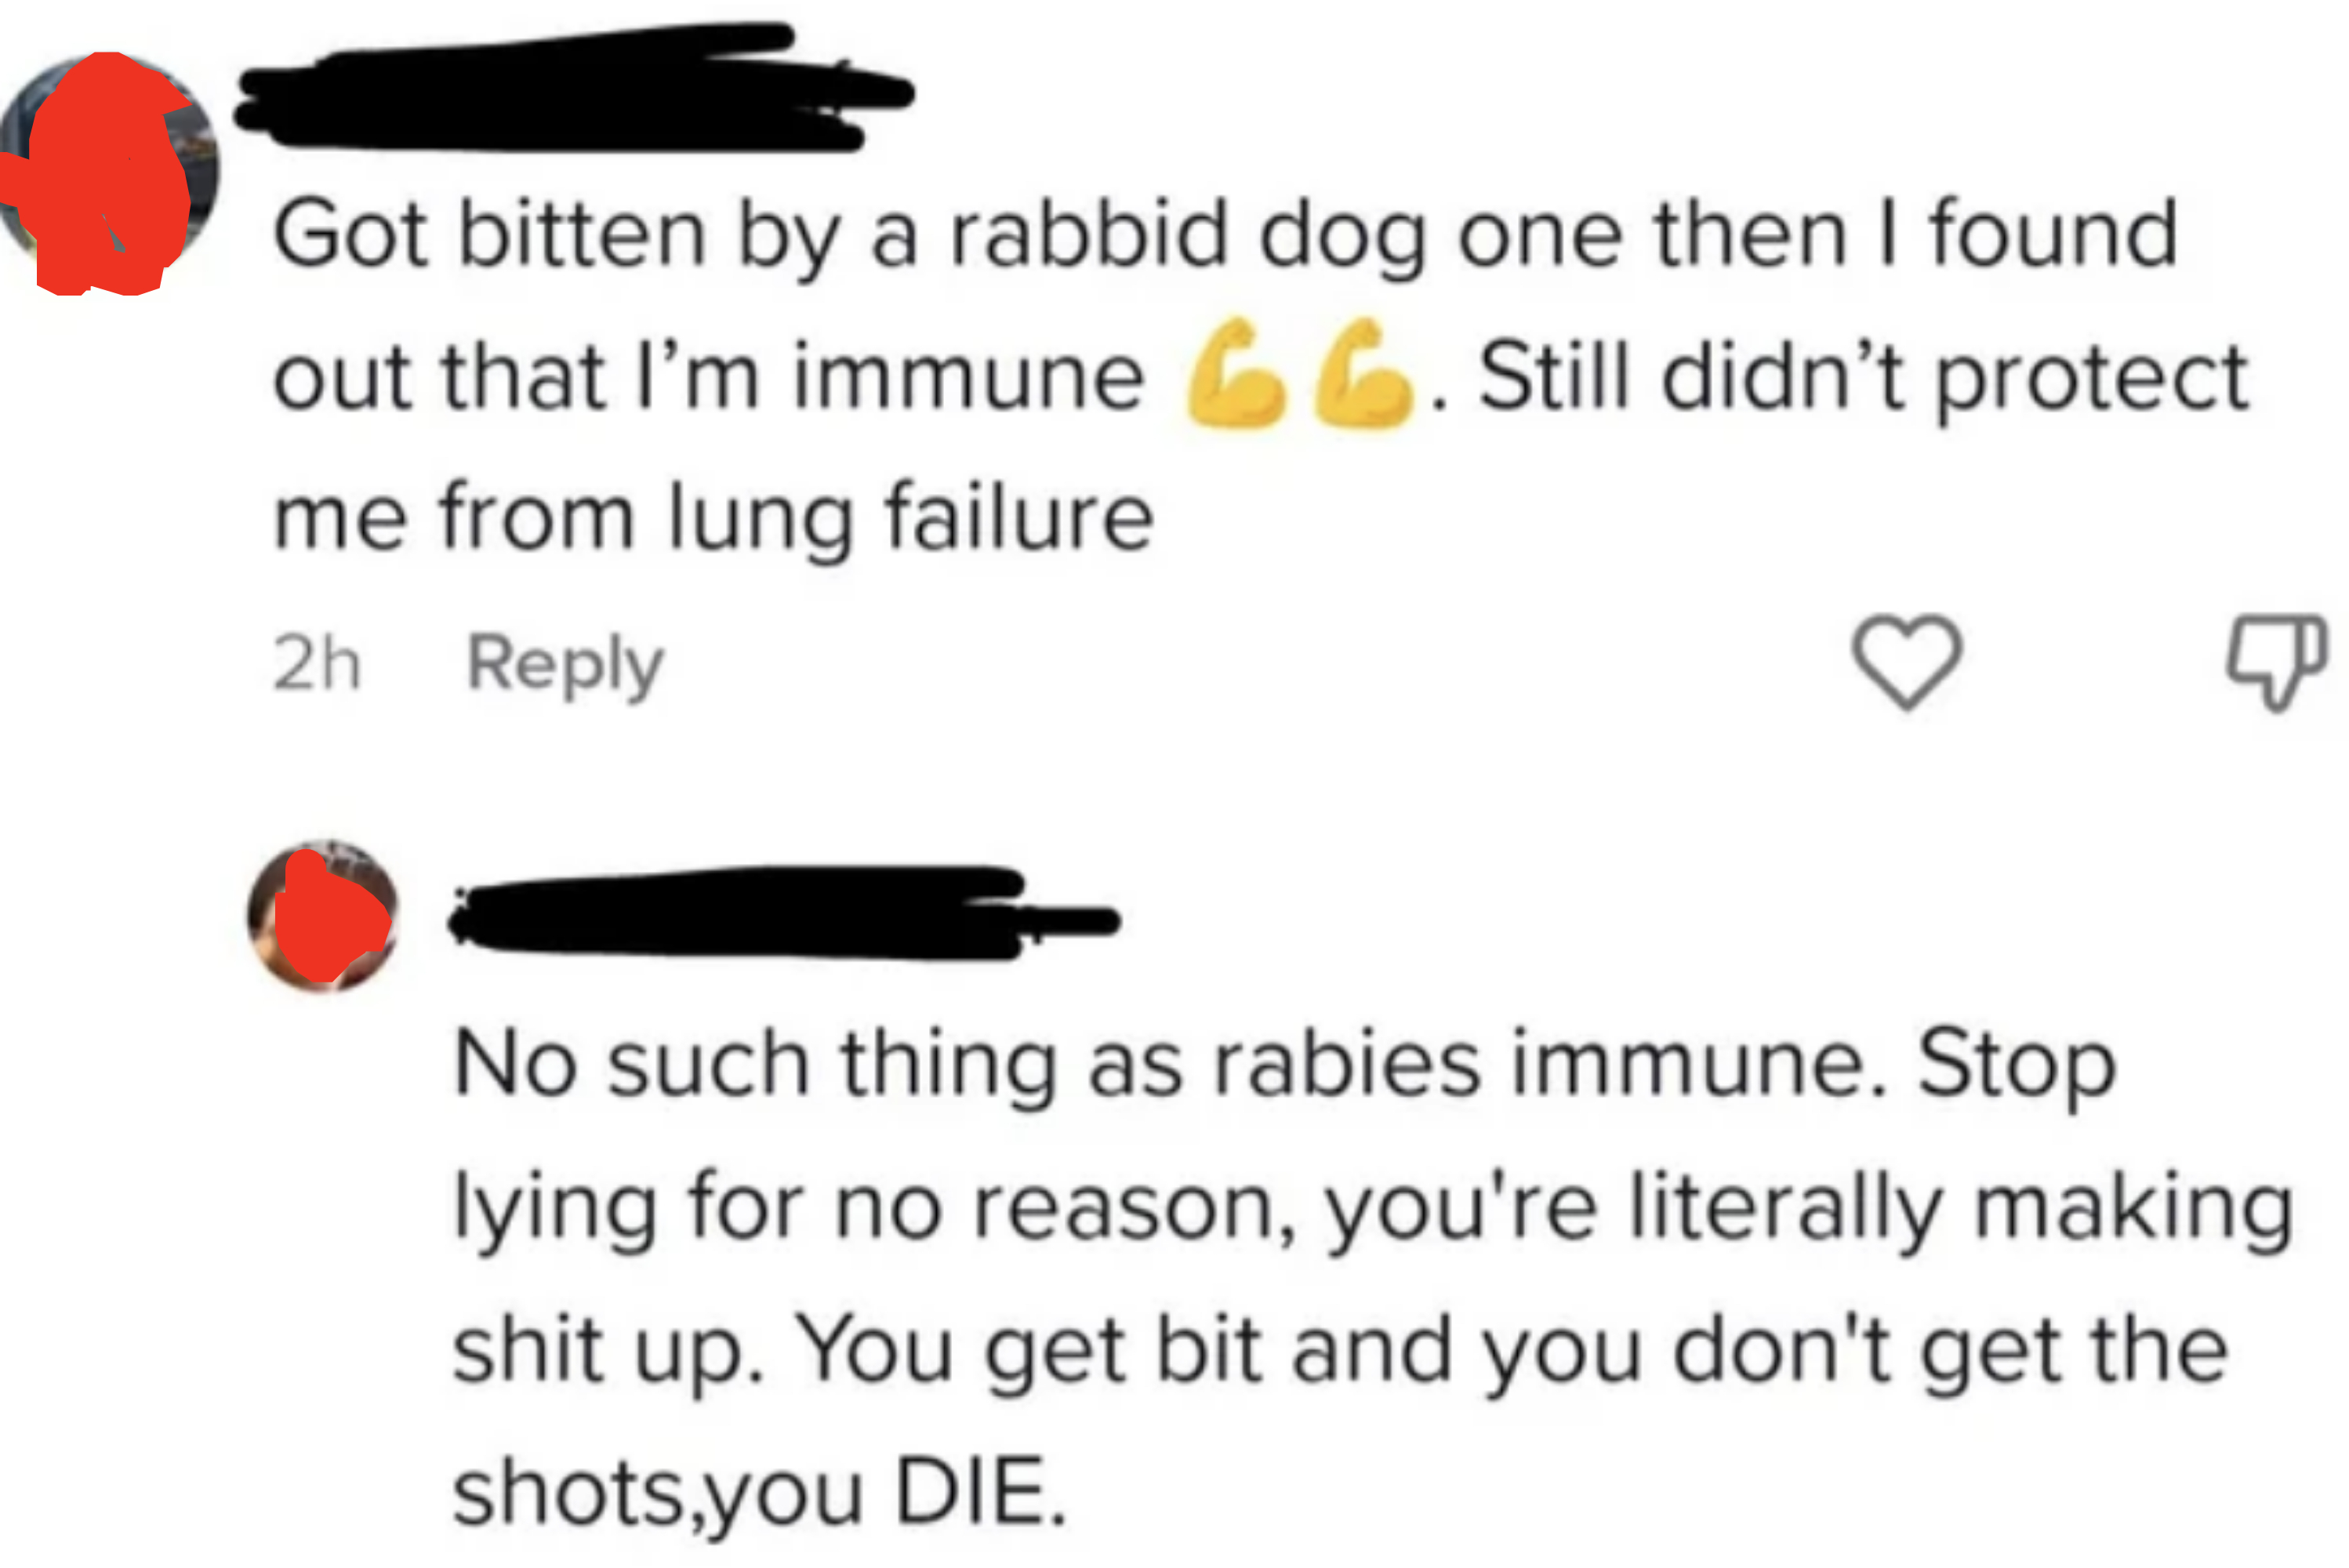 Someone claims they were bitten by a rabid dog but they&#x27;re immune to rabies, and someone else replies there&#x27;s no such thing as rabies immunity